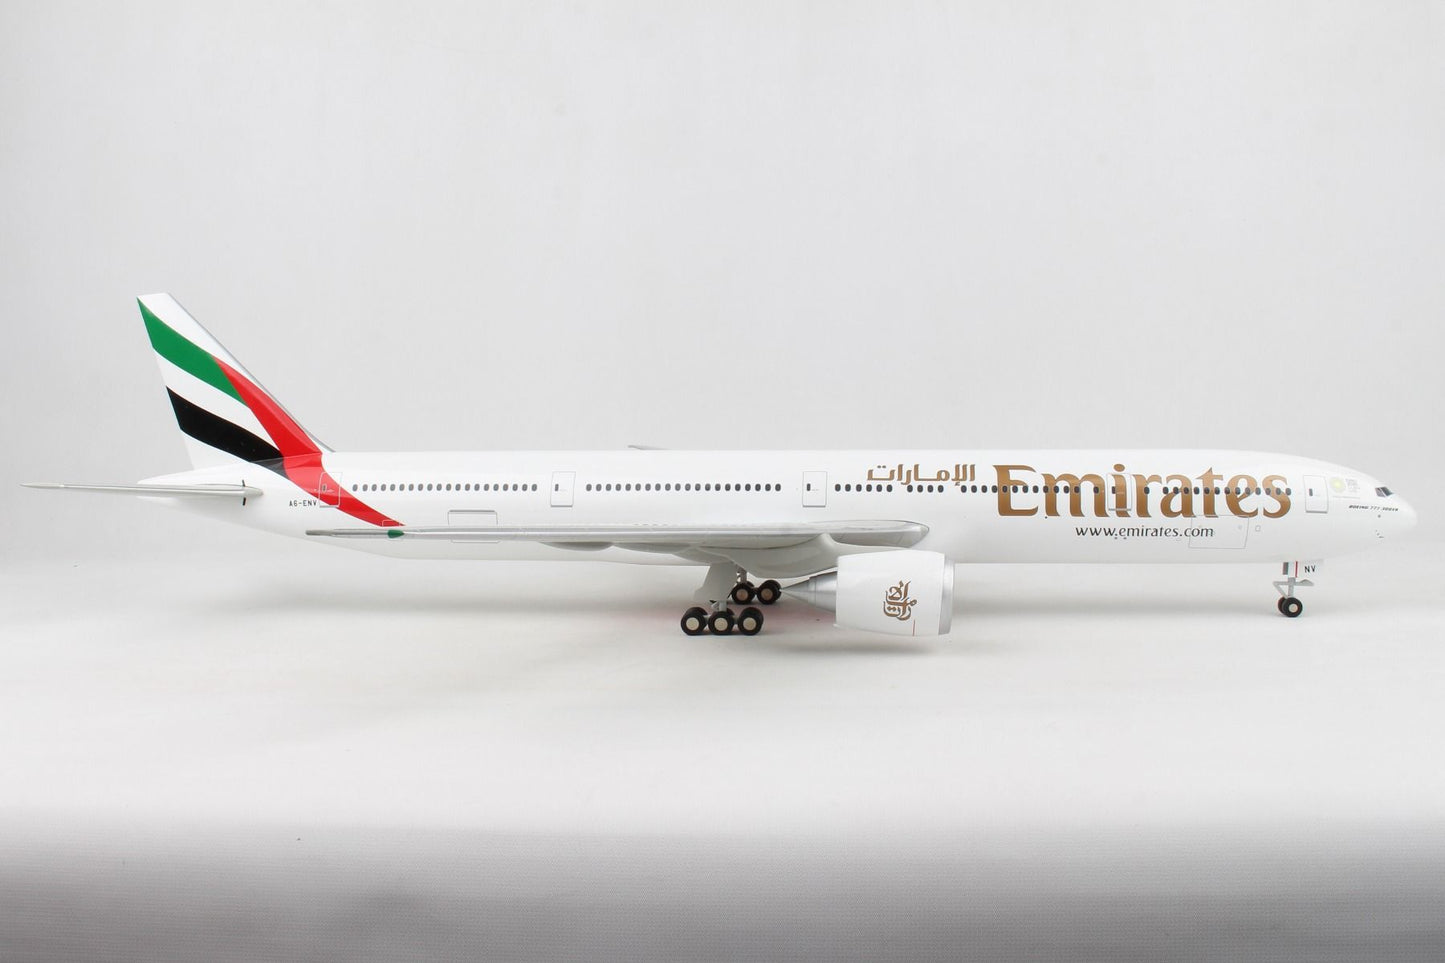 SKYMARKS EMIRATES 777-300ER EXPO 1/100 W/WOOD STAND & GEAR